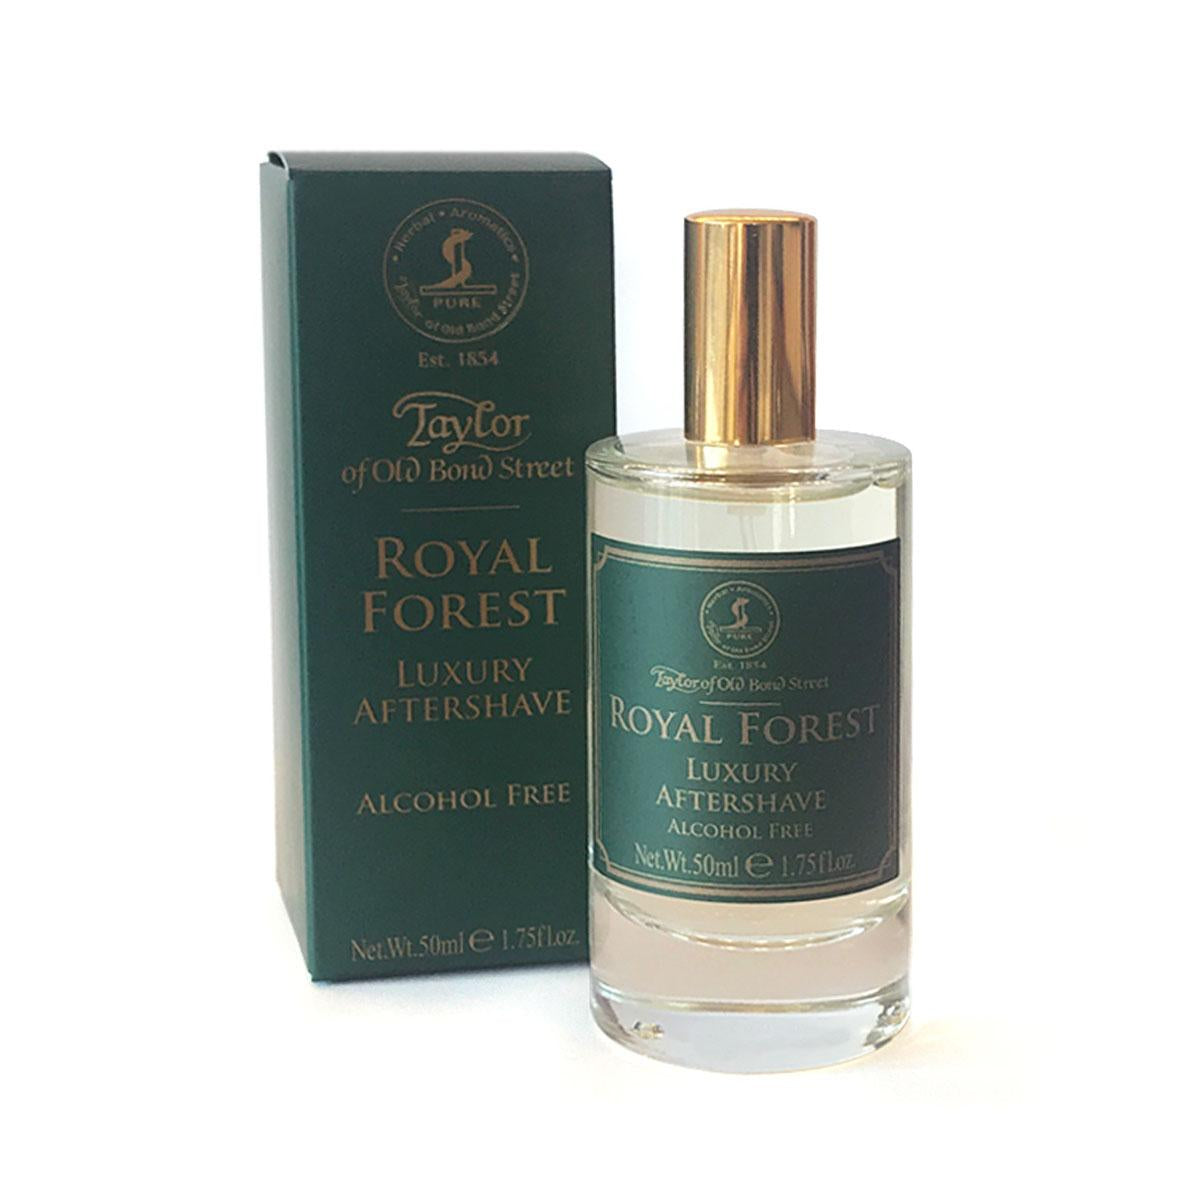 Primary image of Aftershave- Royal Forest